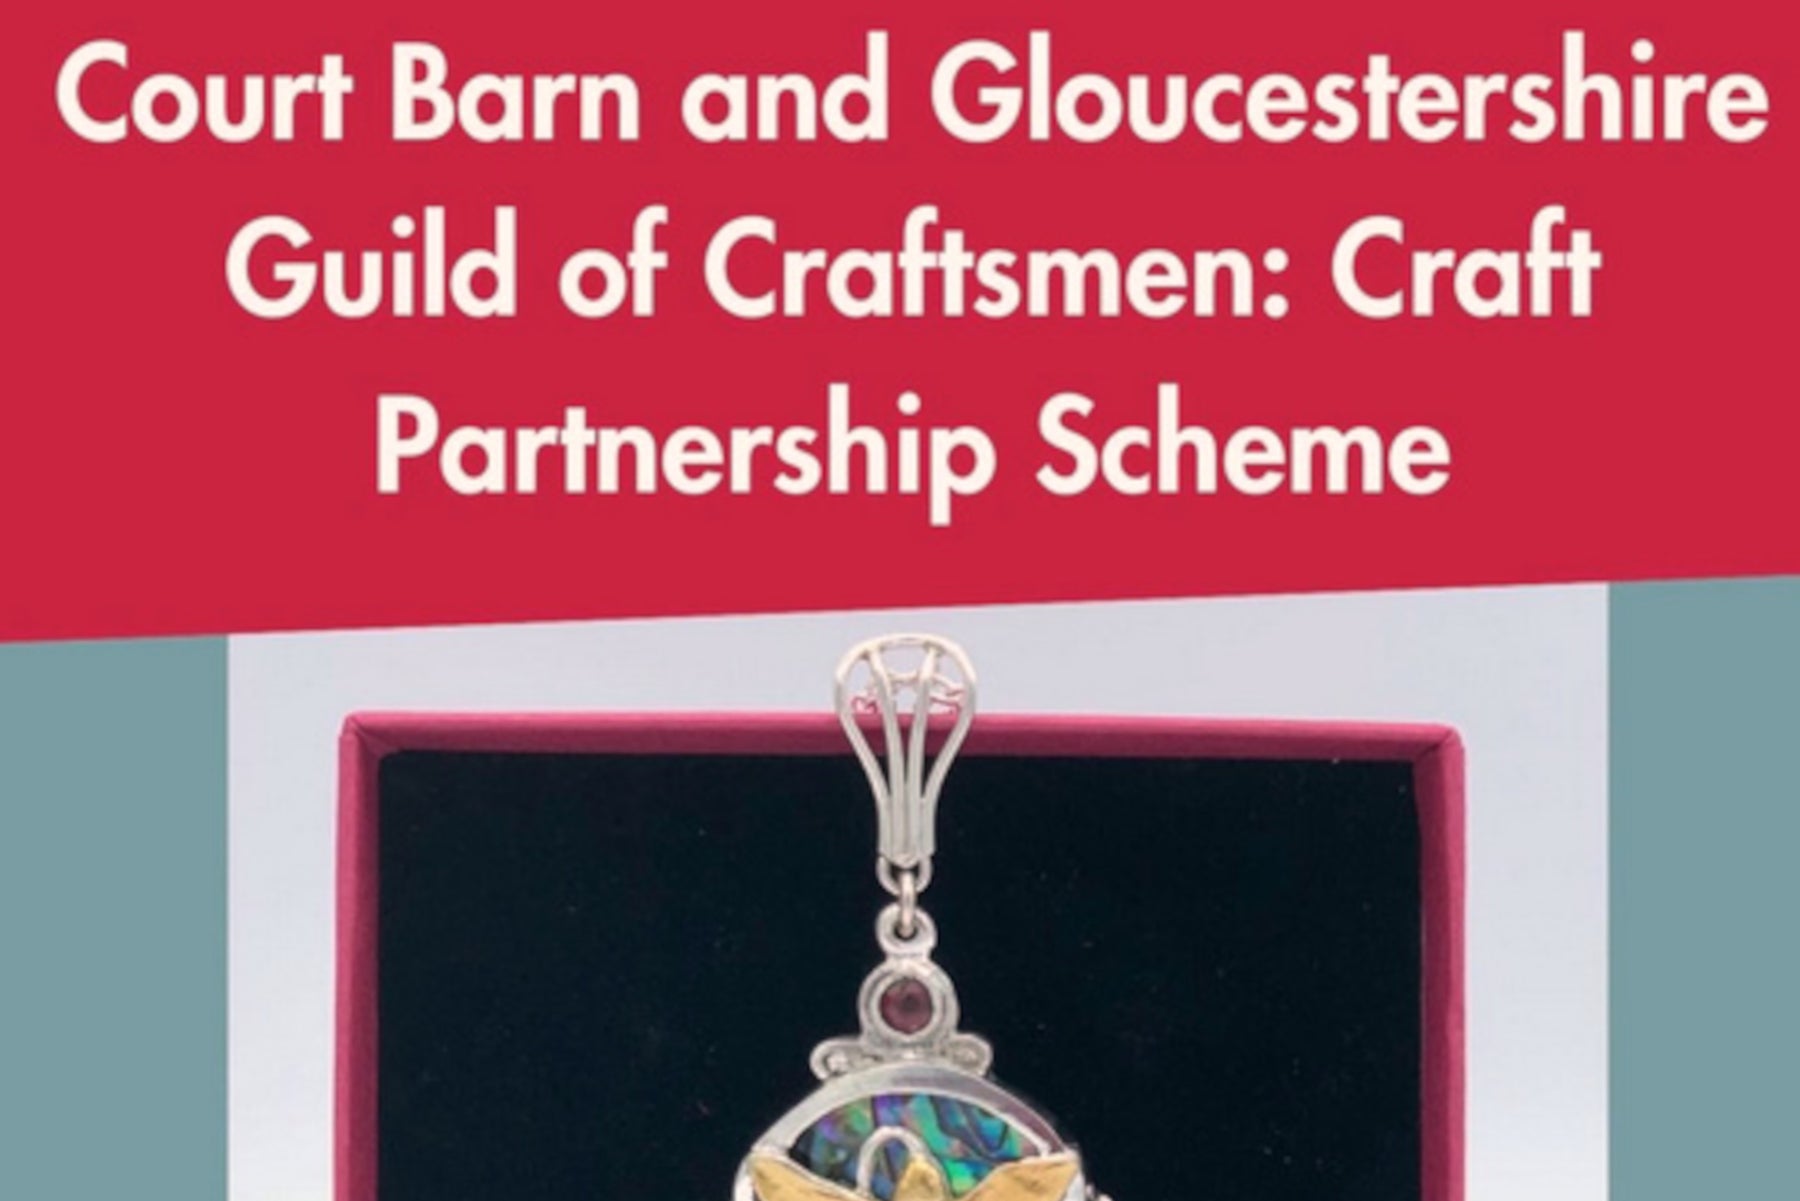 Craft Partnership Scheme with Court Barn - Call for Applicants